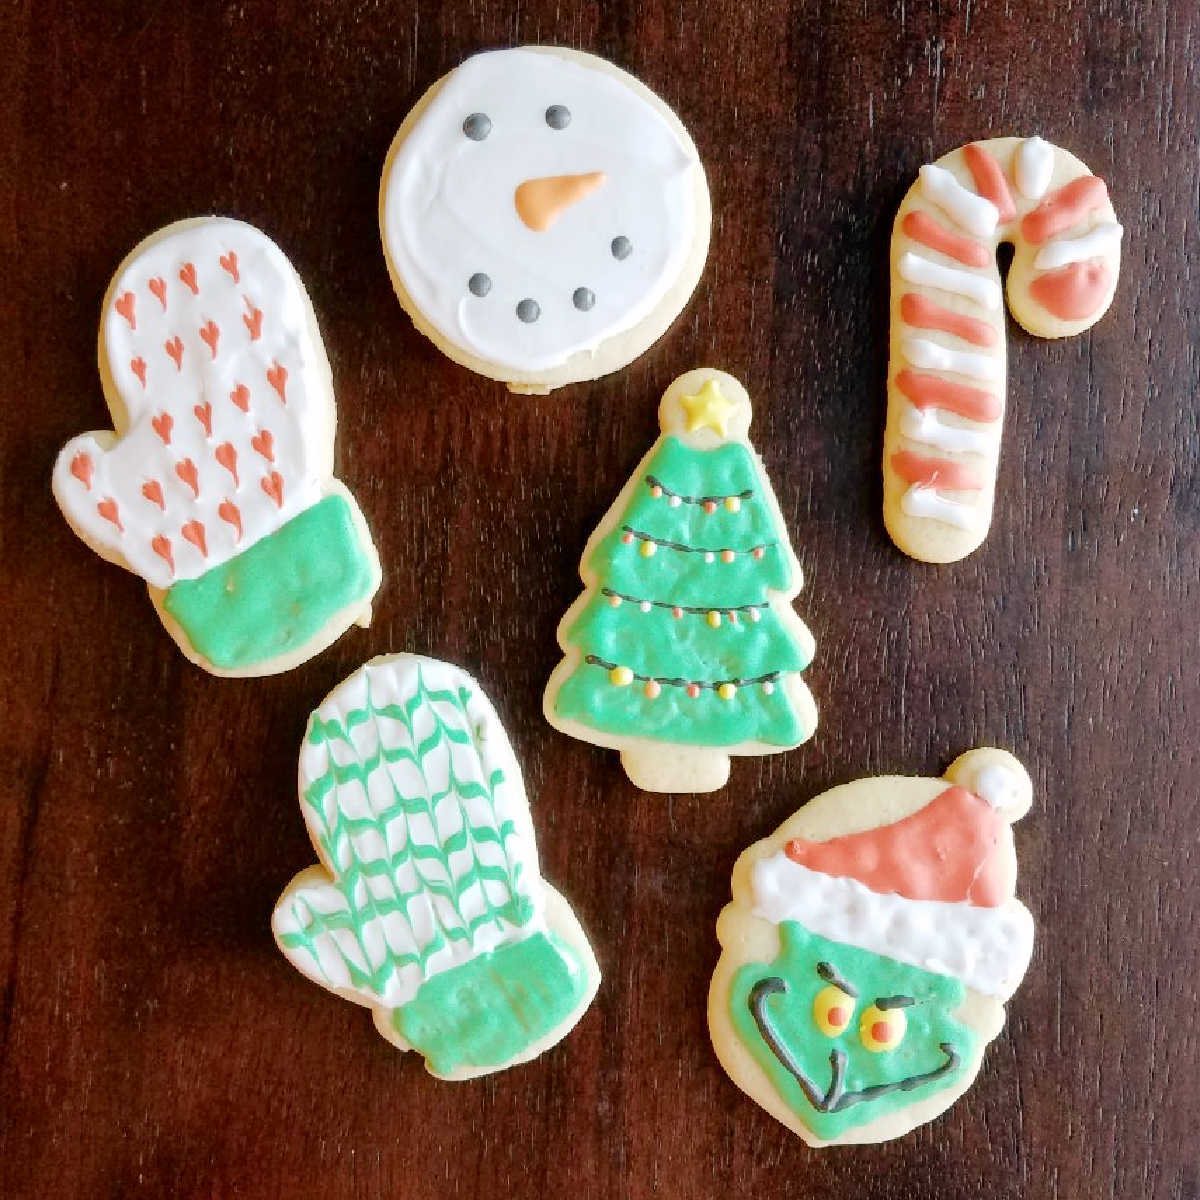 Sugar cookies rolled and cut in Christmas shapes decorated with royal icing.